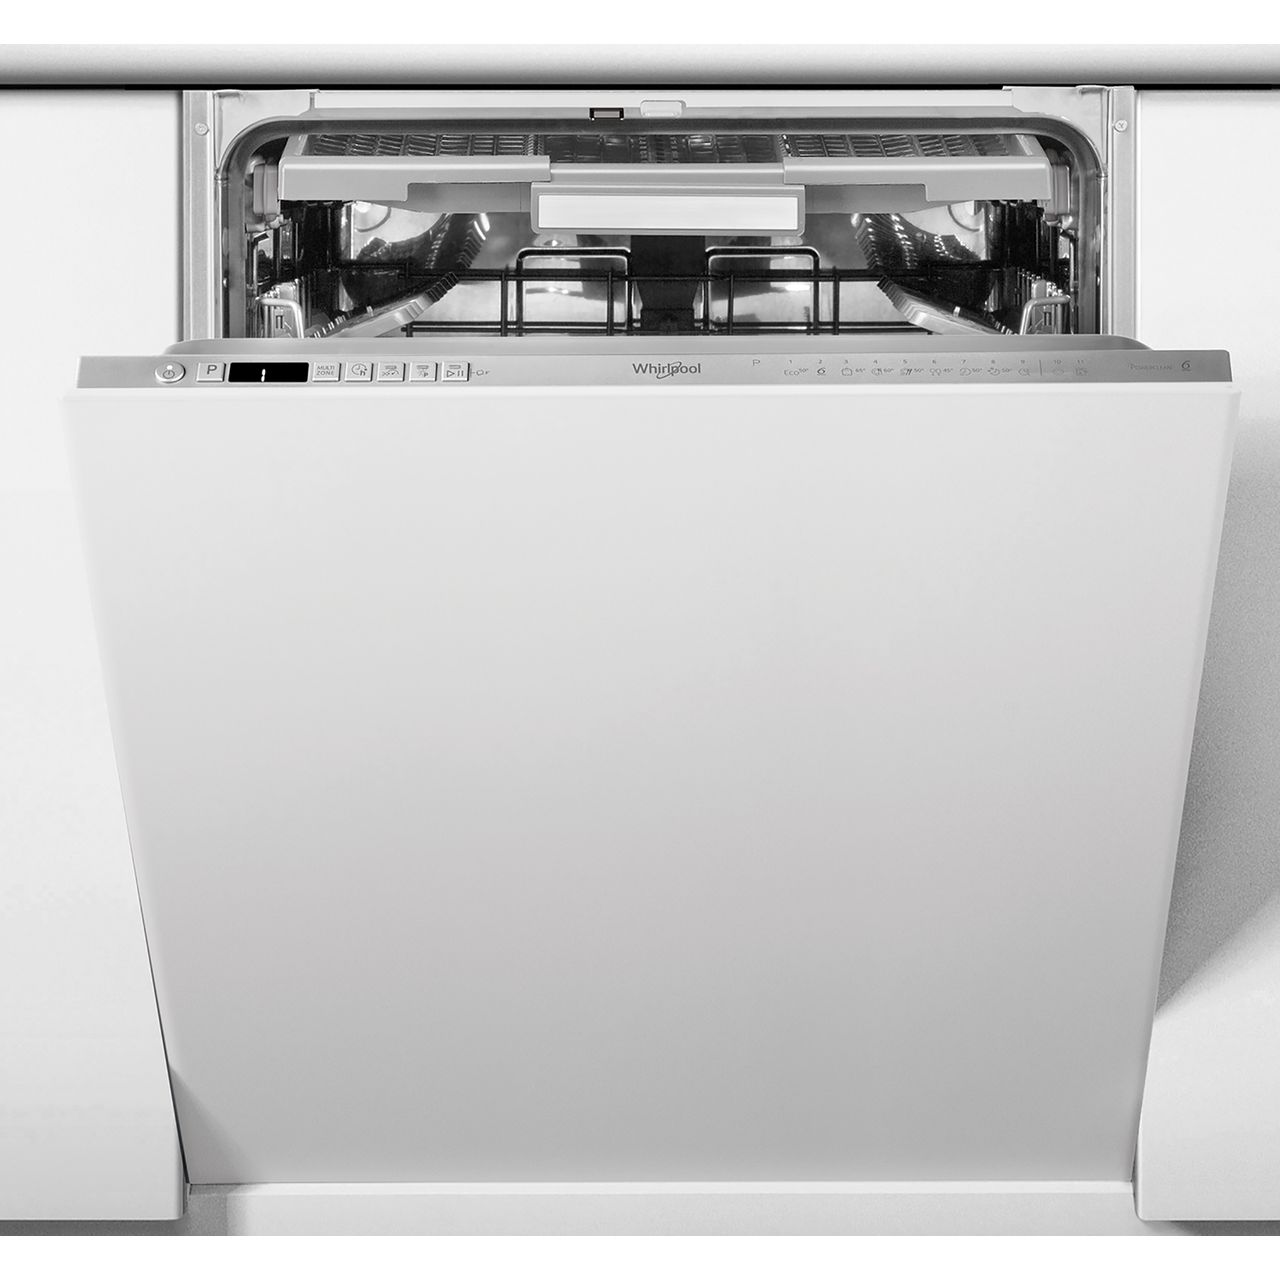 Whirlpool WIO3O33PLESUK Fully Integrated Standard Dishwasher Review